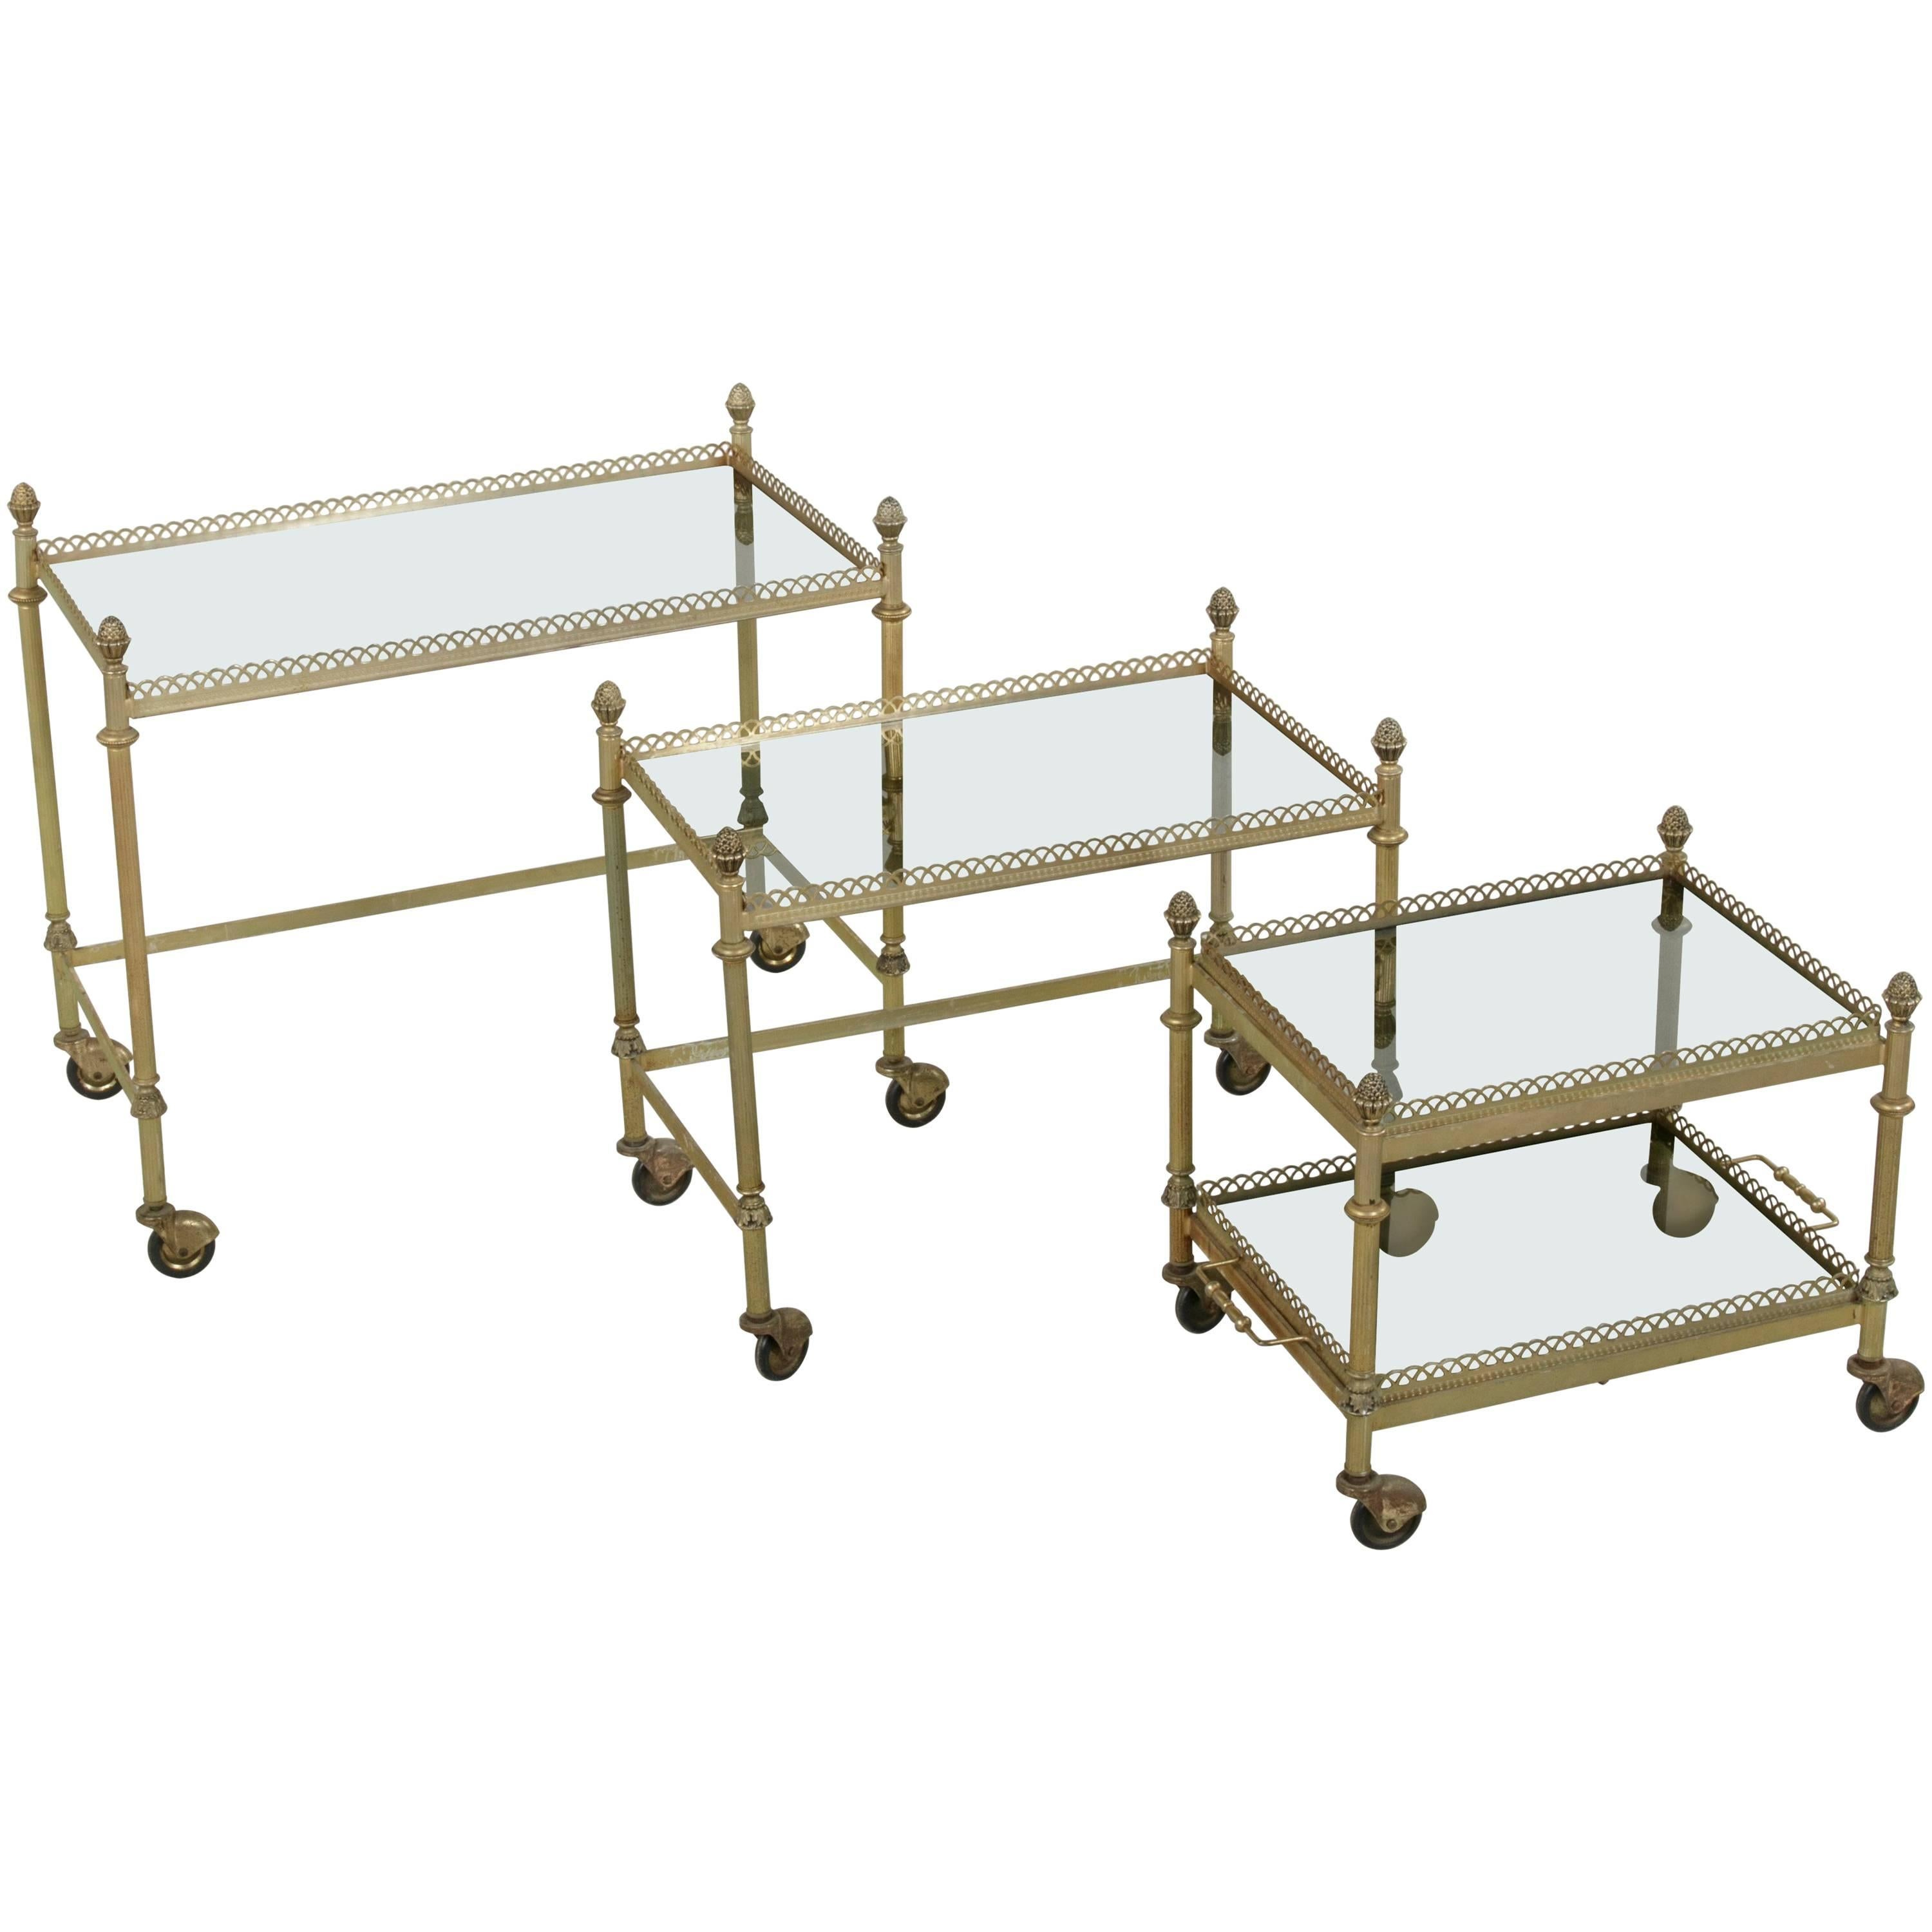 Set of Three Mid-20th Century French Bronze Nesting Tables with Glass Trays